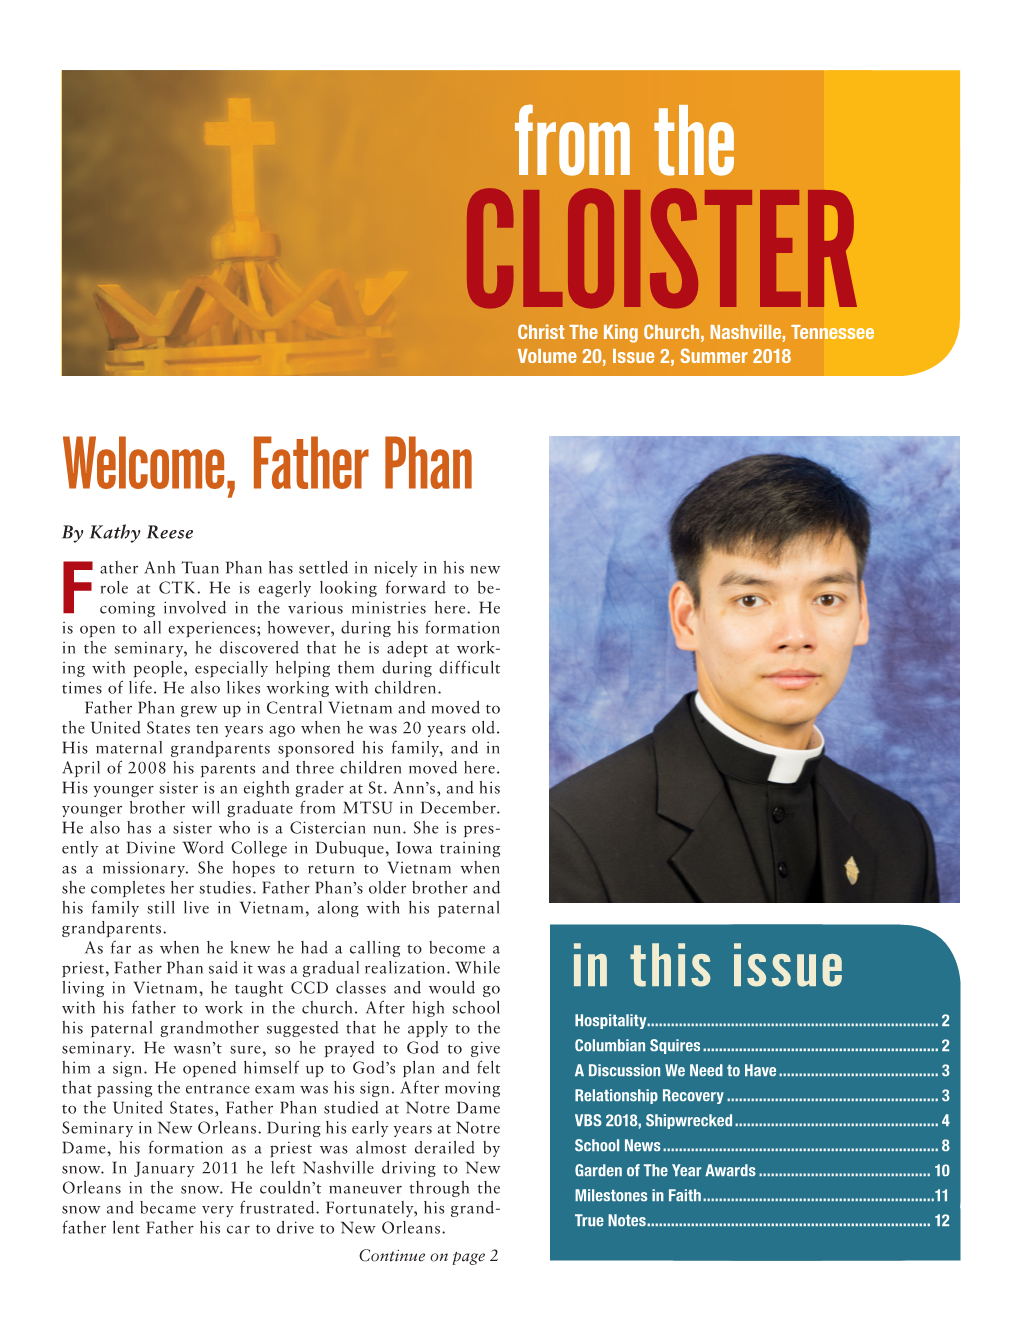 Welcome, Father Phan by Kathy Reese